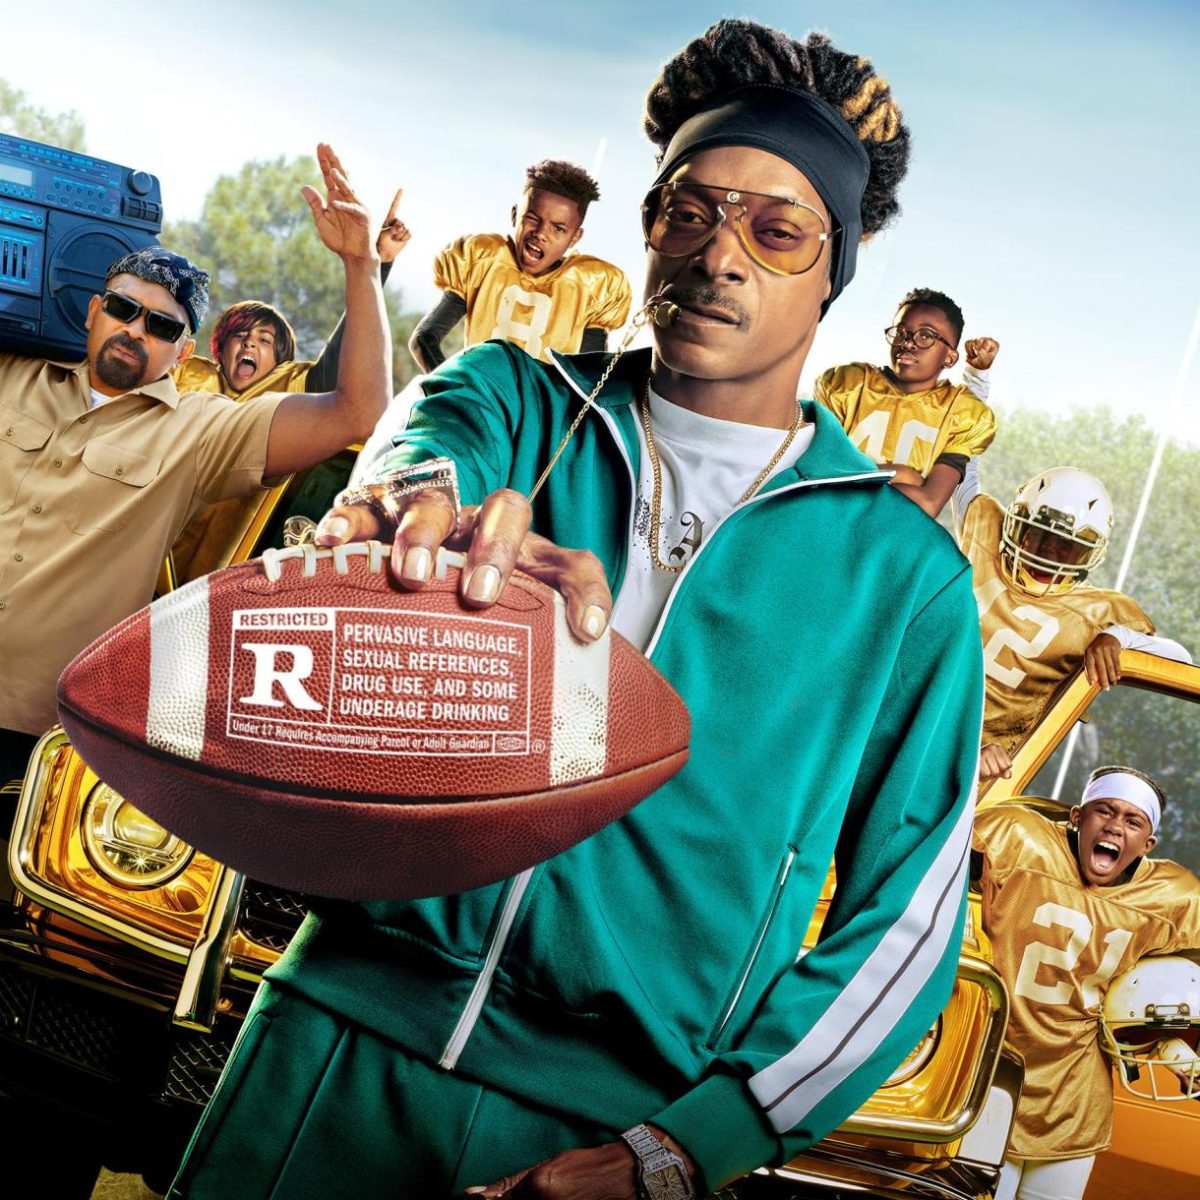 New film with Snoop dog didn’t disappoint and surprised many viewers with how much they enjoyed the film=.